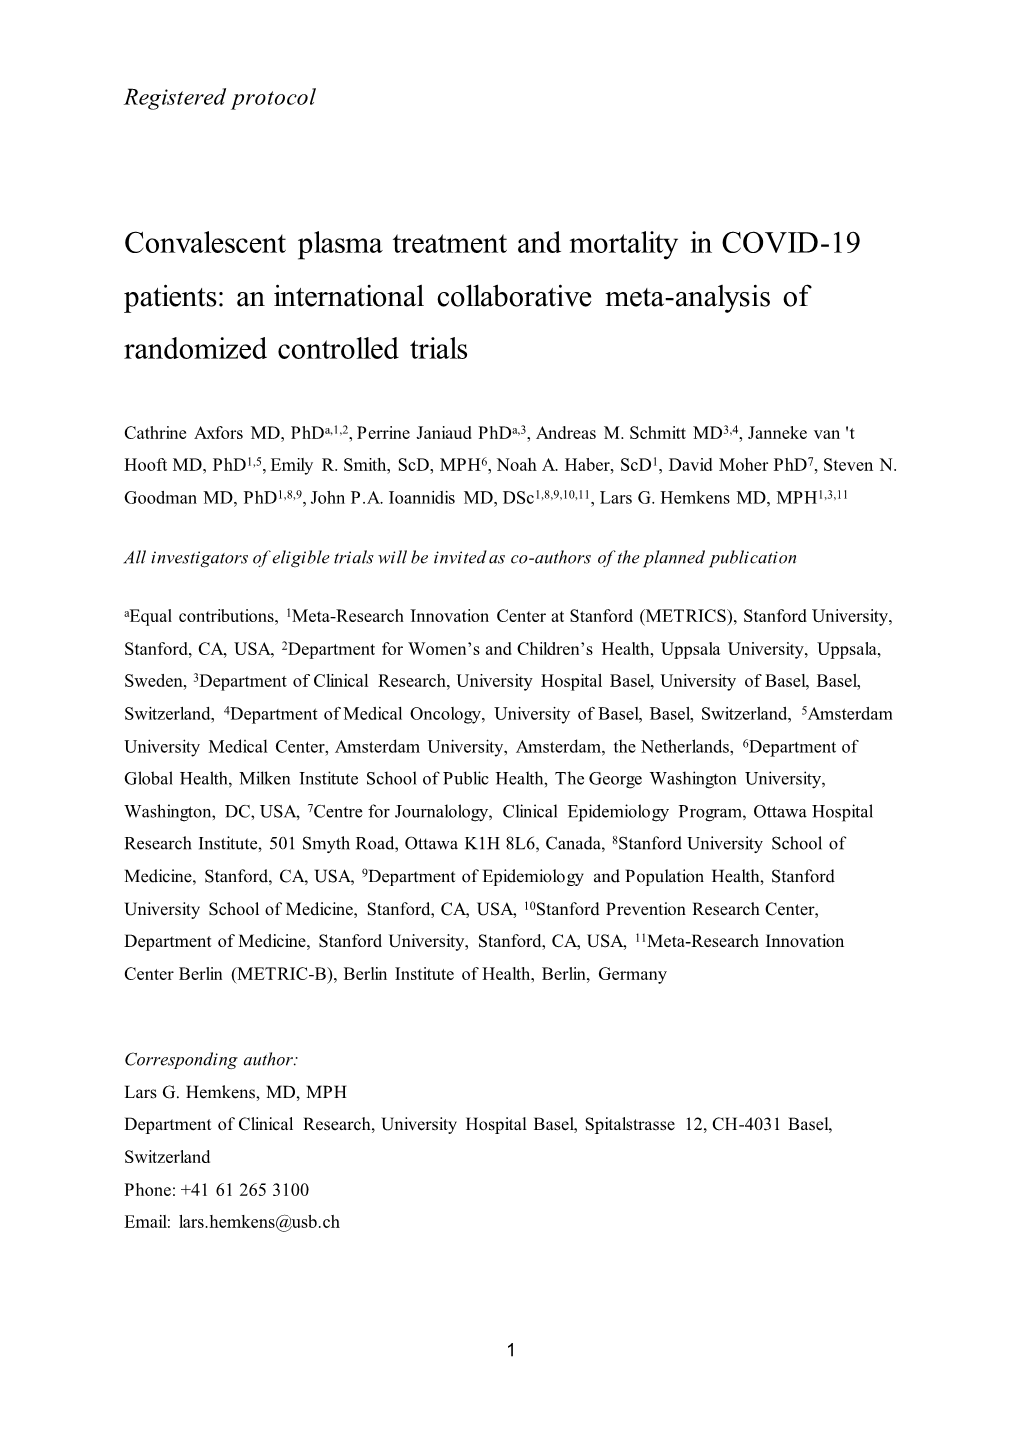 Convalescent Plasma Treatment and Mortality in COVID-19 Patients: an International Collaborative Meta-Analysis of Randomized Controlled Trials